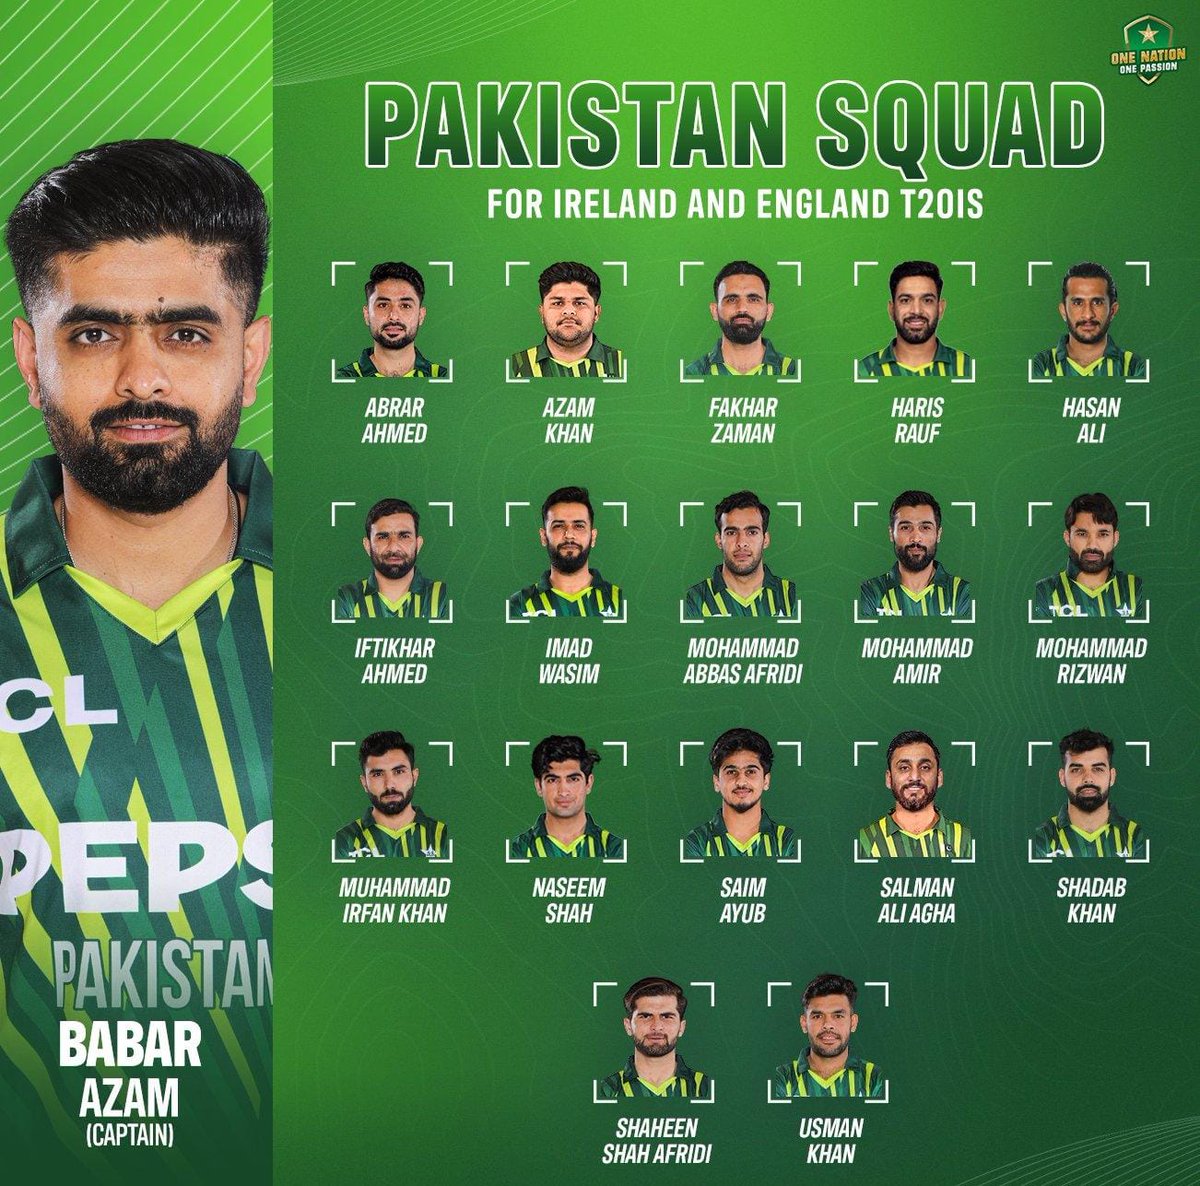 How satisfied are you guys with this squad? Who can be in place of whom? #PakistanCricket #Pakistan